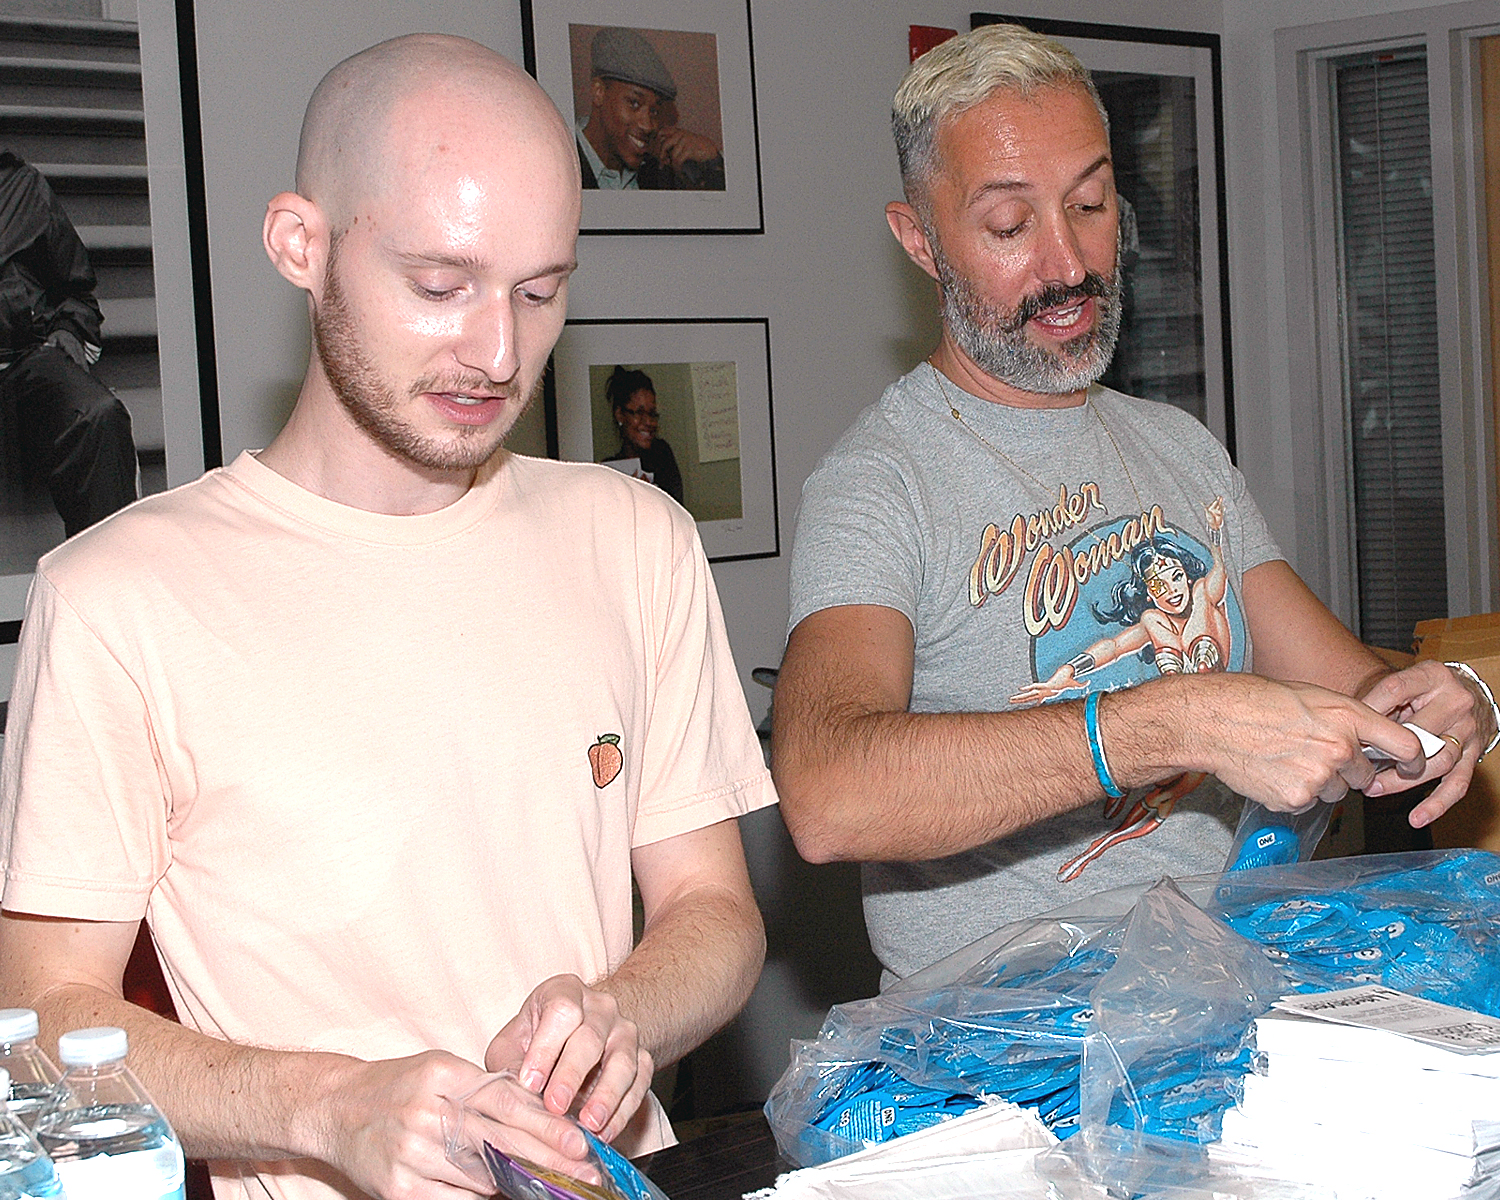 Two volunteers from PVH, Inc. assembling Safer Sex kits